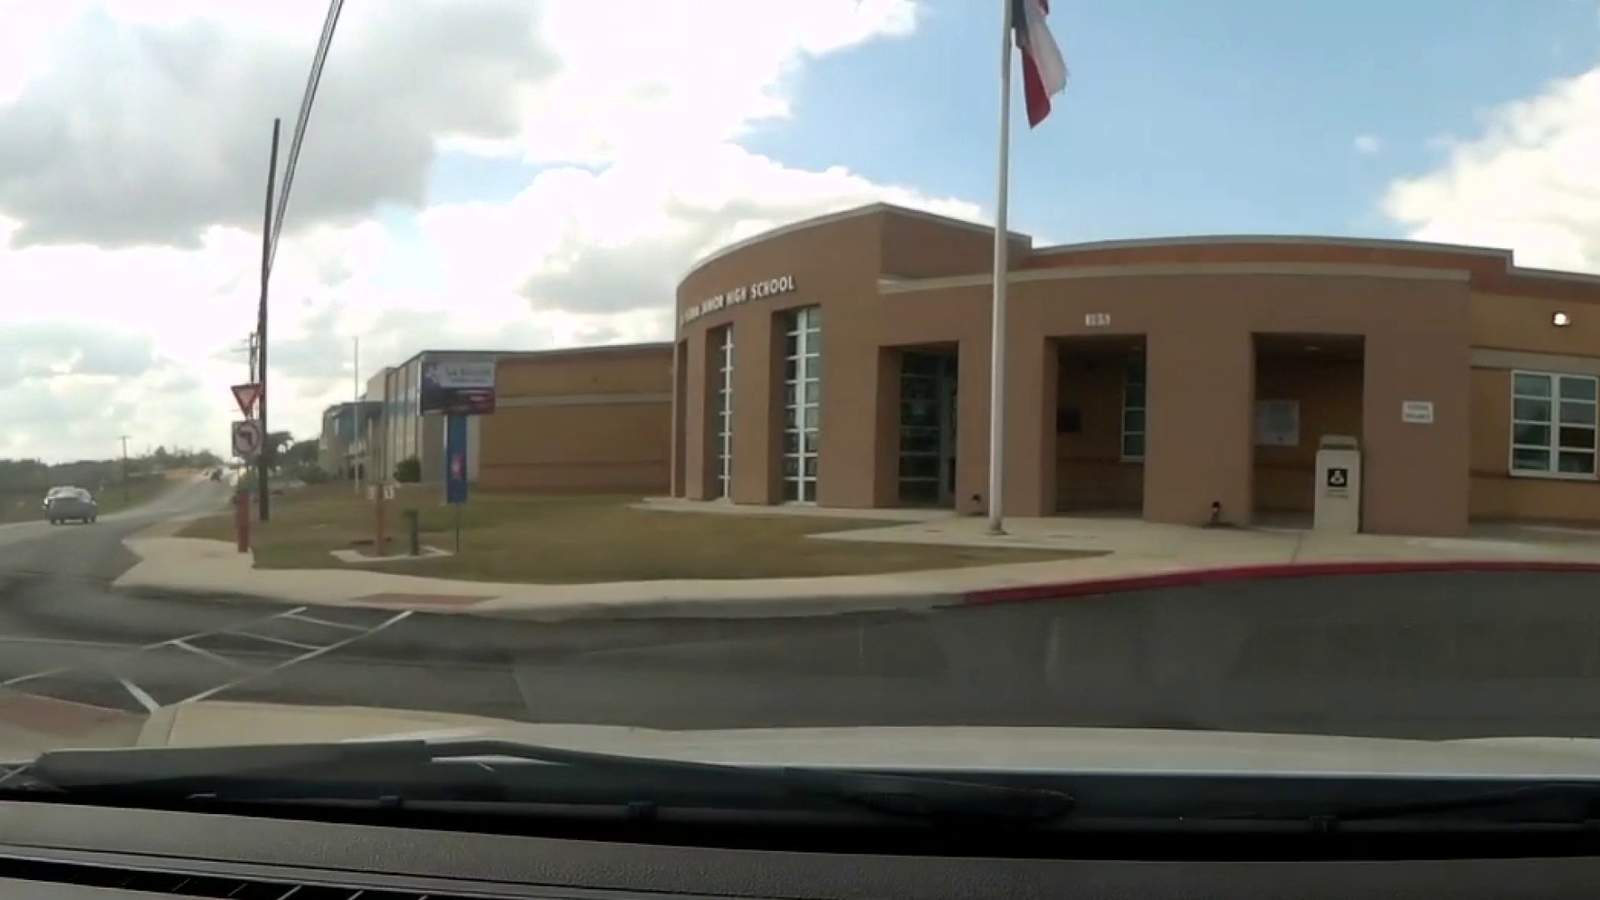 Remote learning at La Vernia ISD no longer an option after Thanksgiving holiday